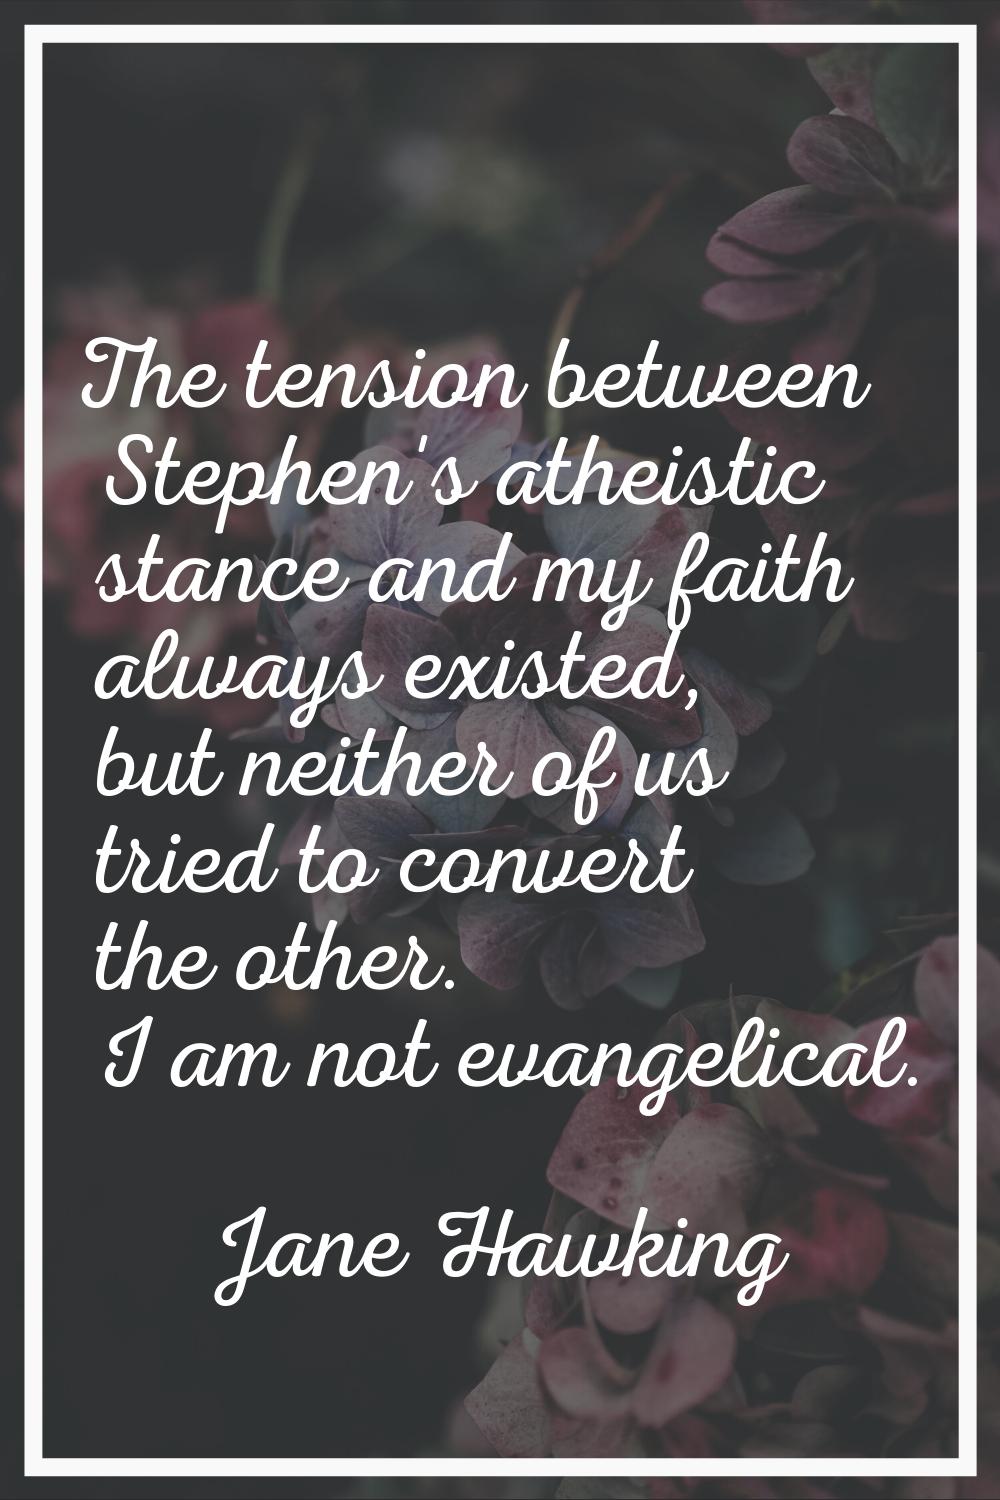 The tension between Stephen's atheistic stance and my faith always existed, but neither of us tried